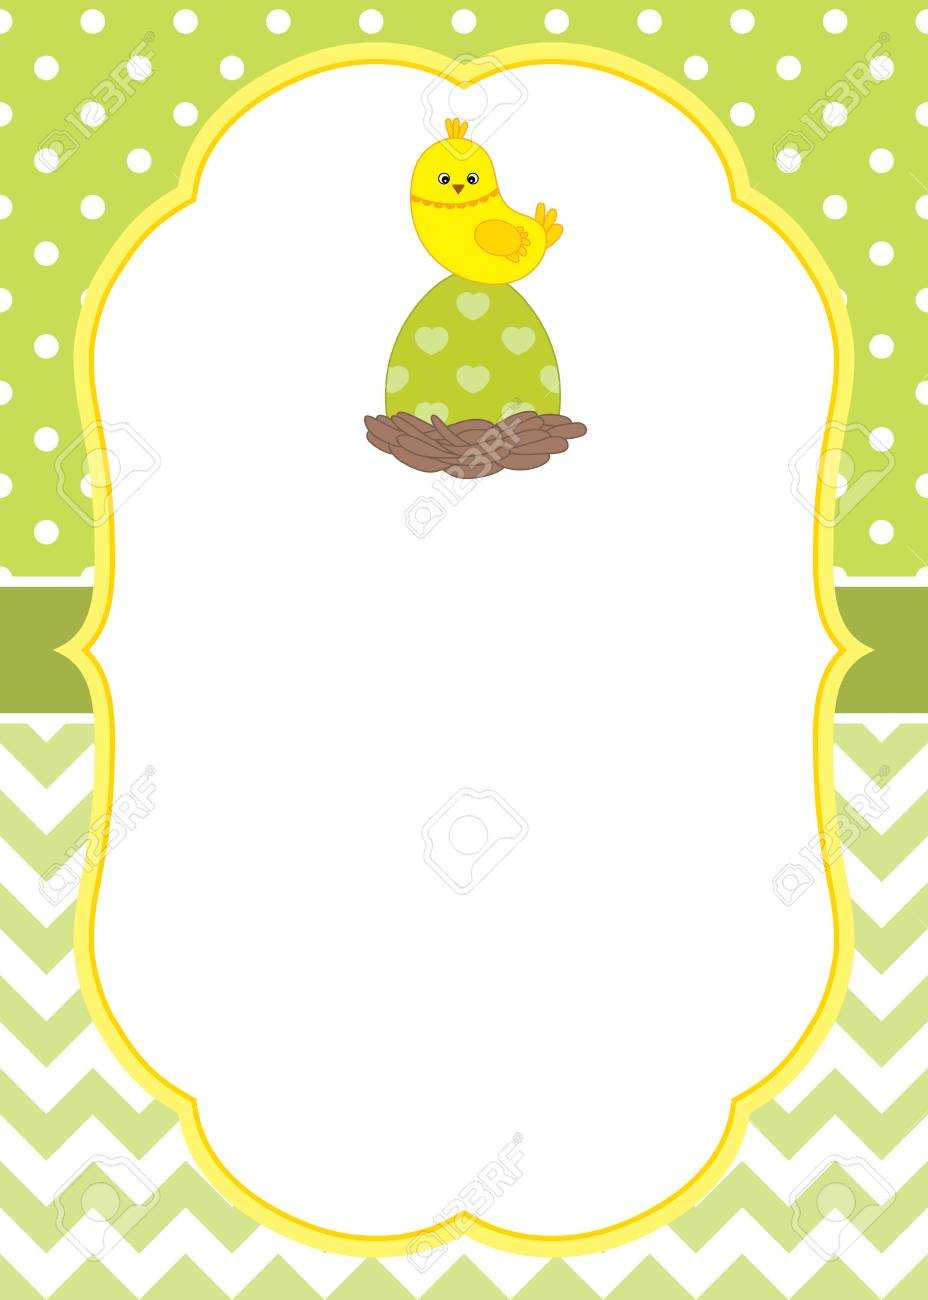 Vector Card Template With A Cute Chick On Polka Dot And Chevron Background.  Vector Easter Egg. Vector Illustration. With Regard To Easter Chick Card Template